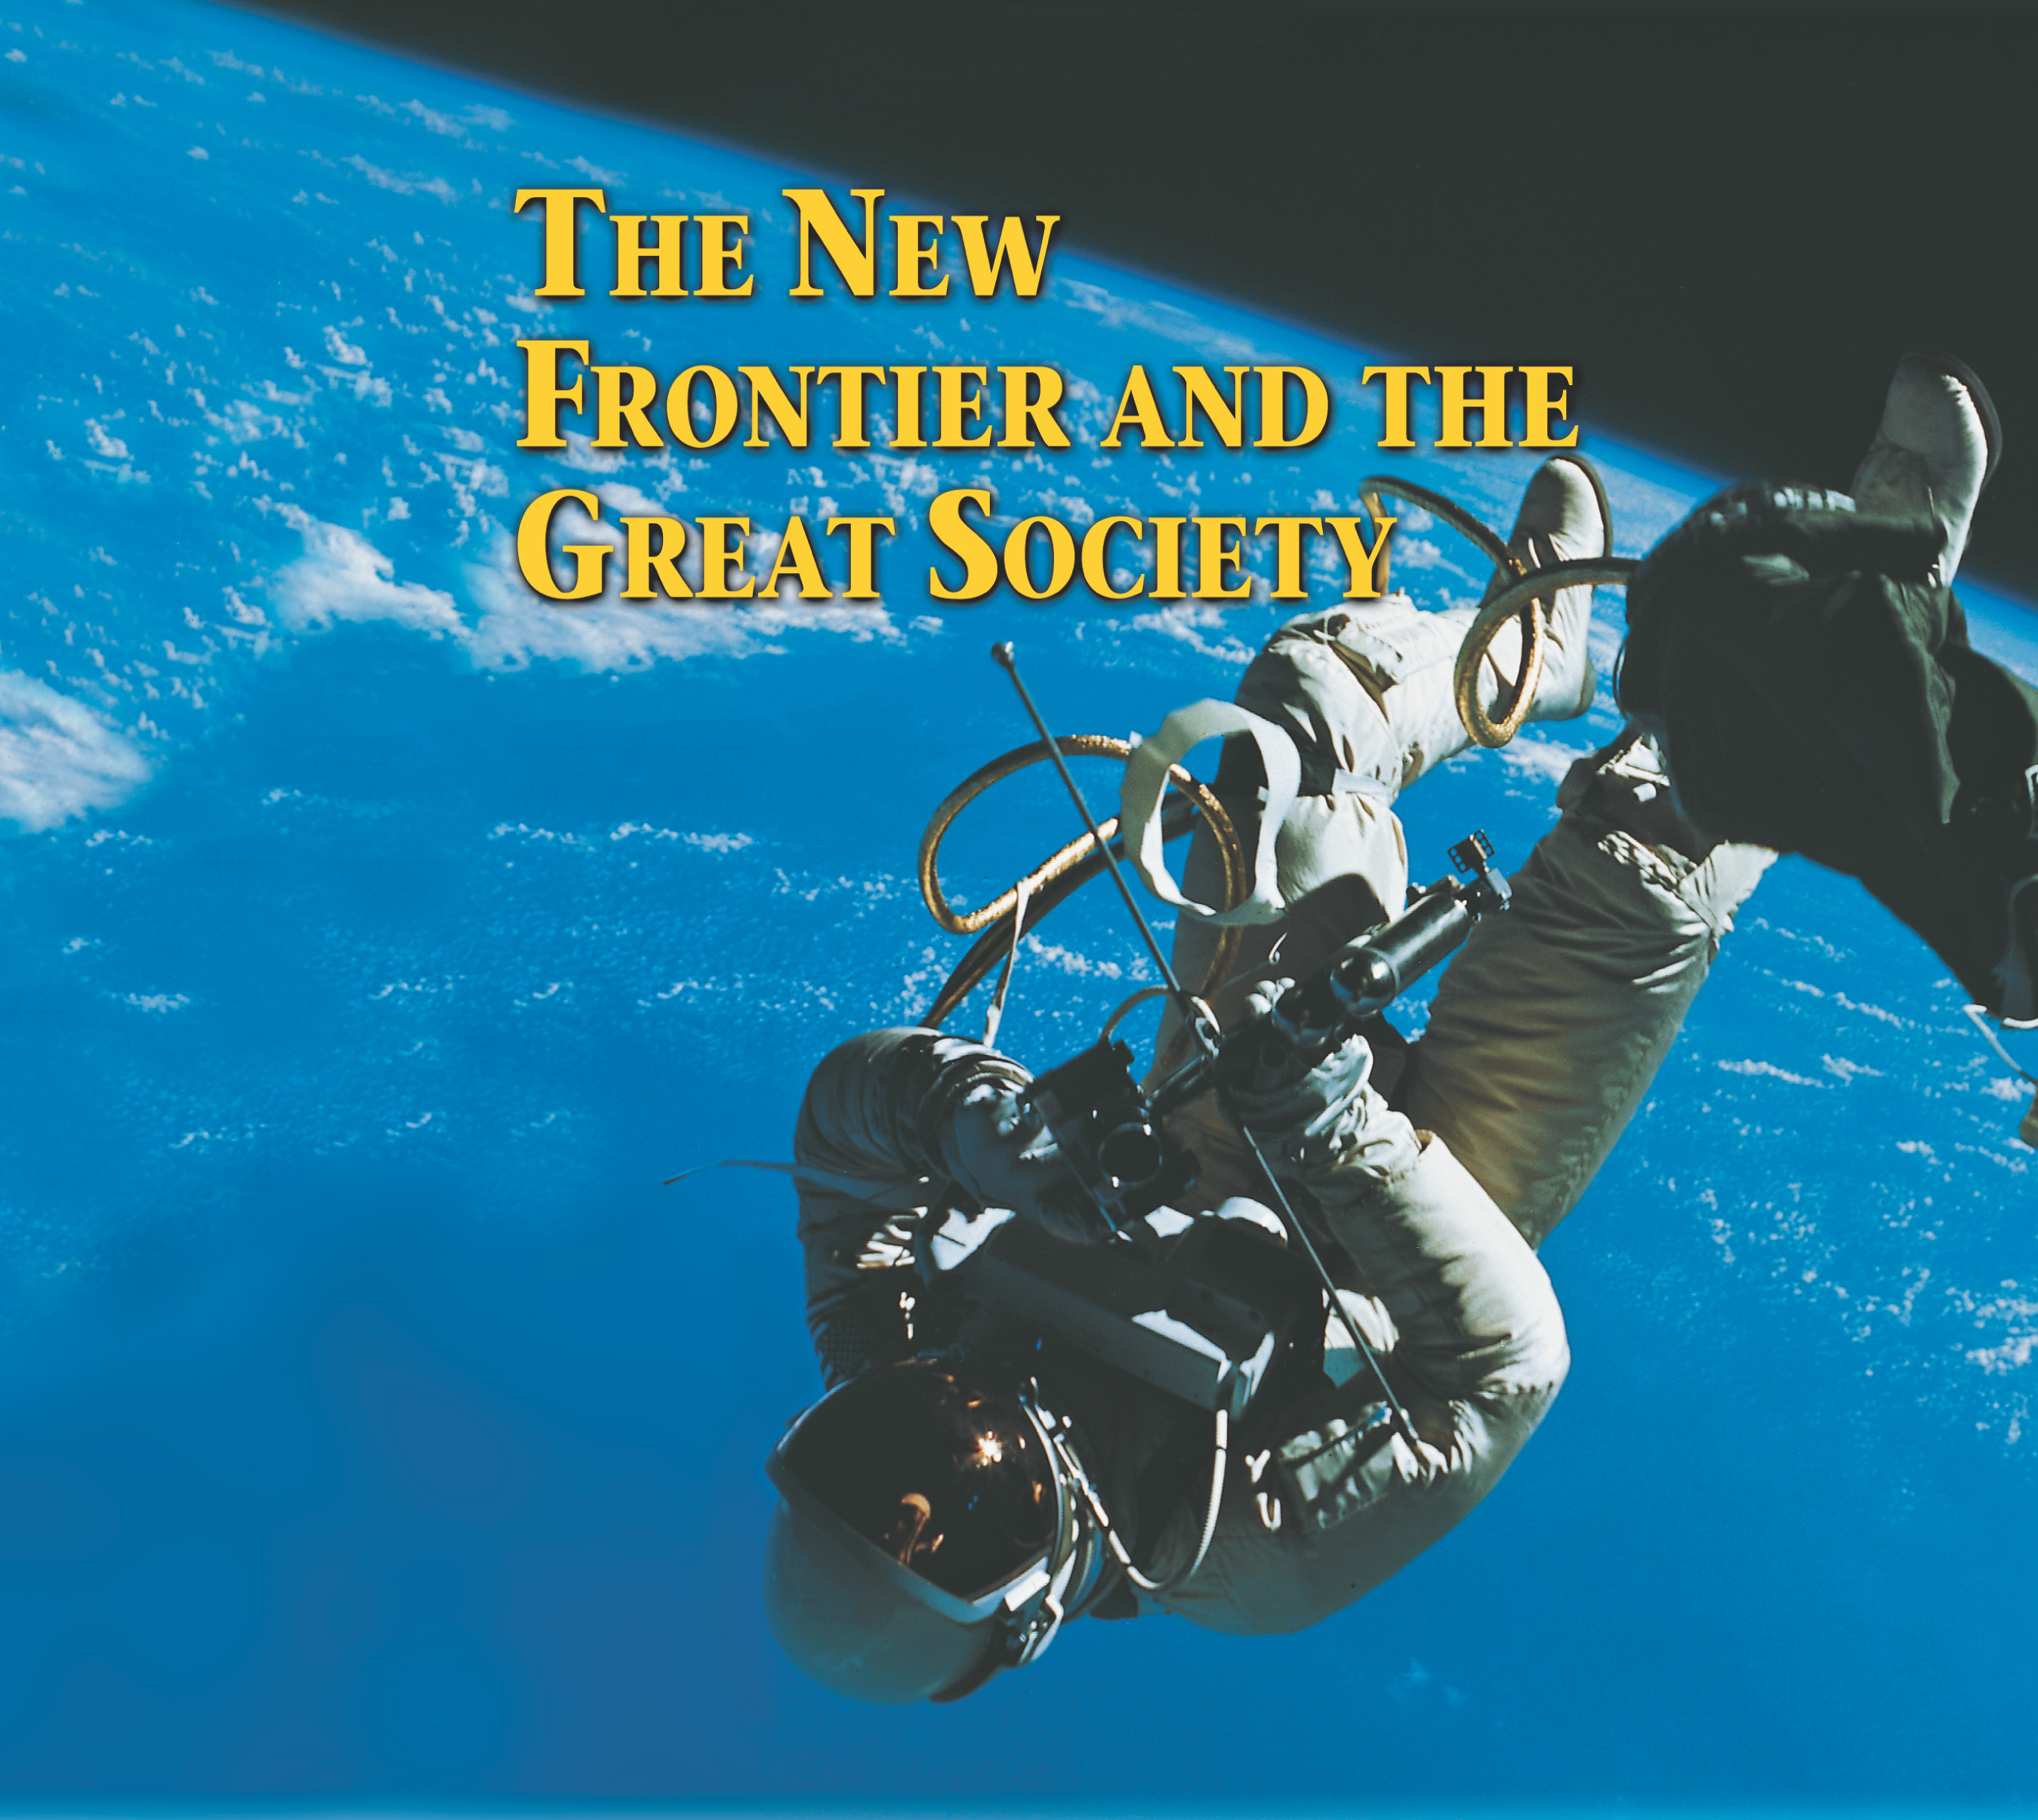 Photo: An astronaut
floats in space above the earth. A title: The New Frontier and the Great Society.